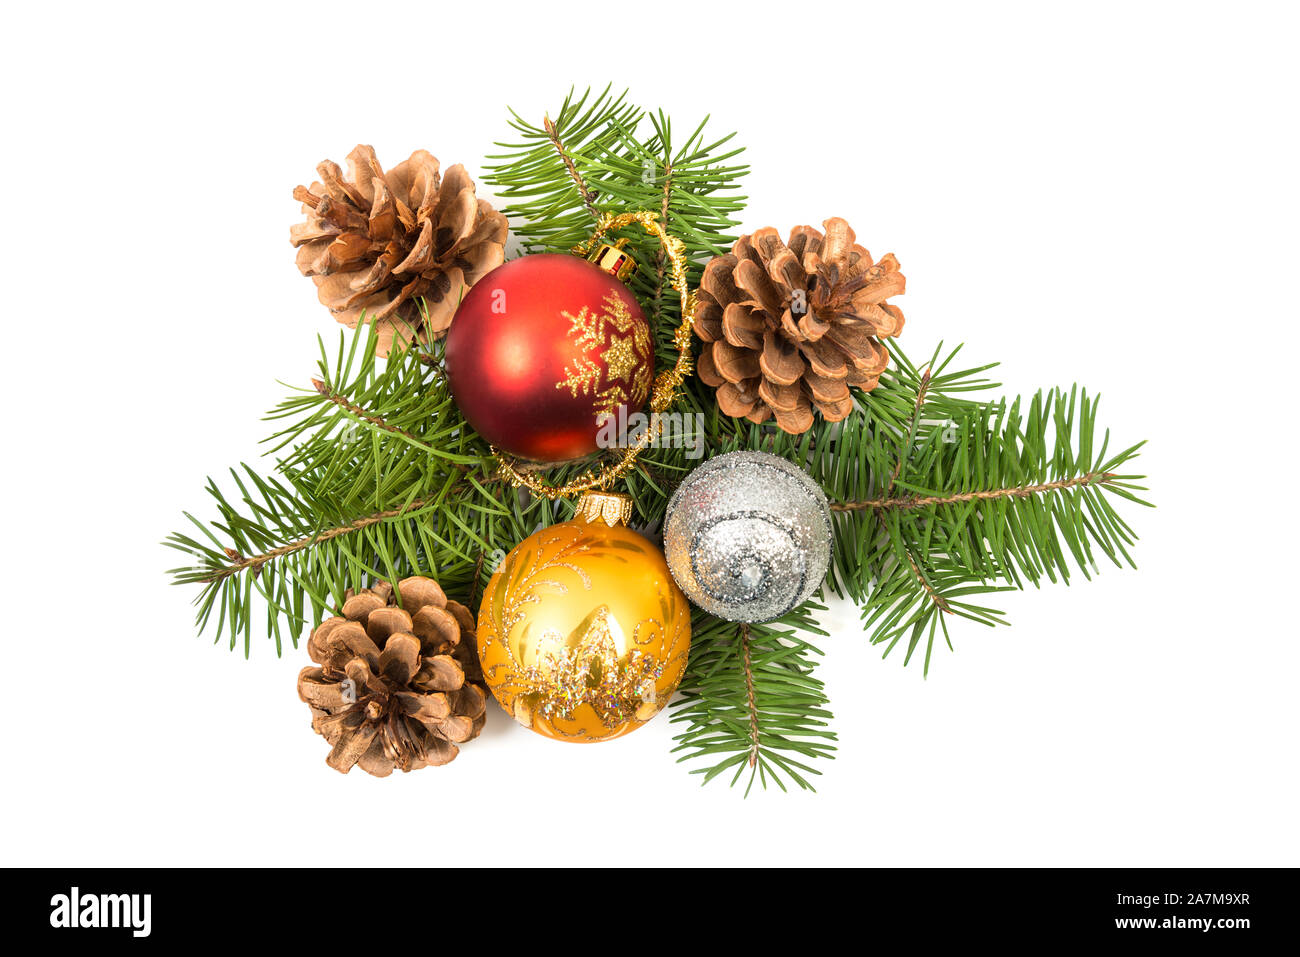 Pine cones with spruce tree branch and Christmas decoration bauble balls on a white background. Top view Stock Photo